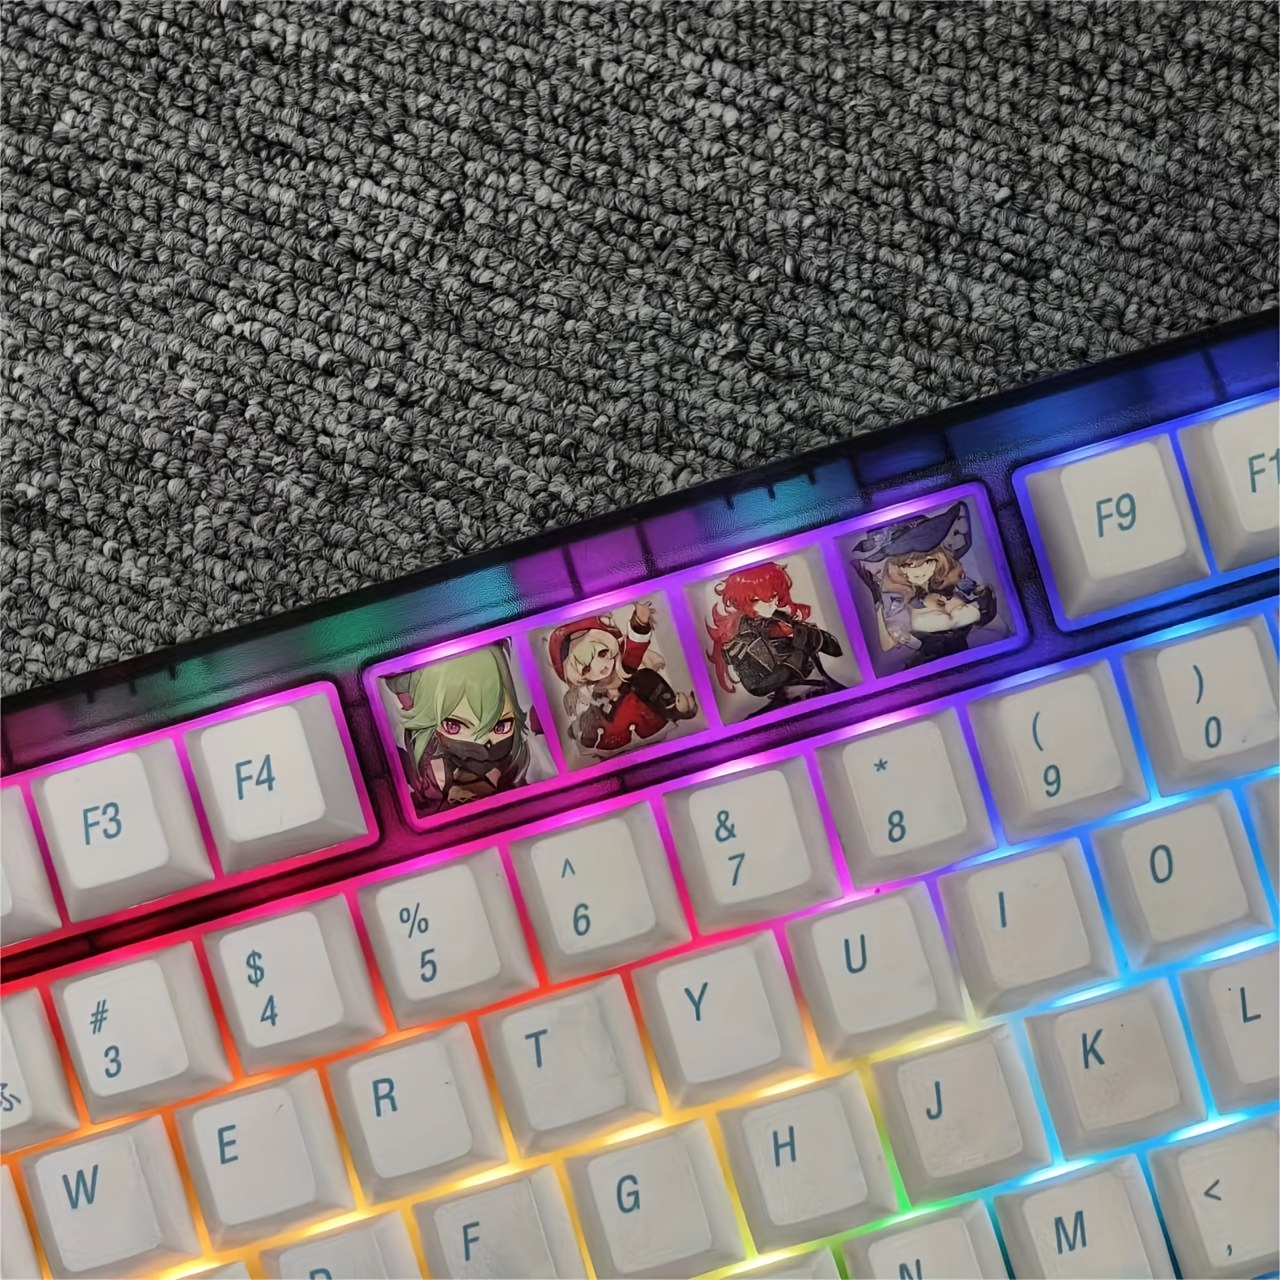 IOAOI Kawaii Keycaps,PBT Keycaps Set OEM Profile Anime Keycaps with Key  Fetcher for Cherry MX Switches /GK61/ GK64/ RK61/ Anne/ GH60 / ALT61  Mechanical Keyboards (Coral Sea) - Only Keycaps 